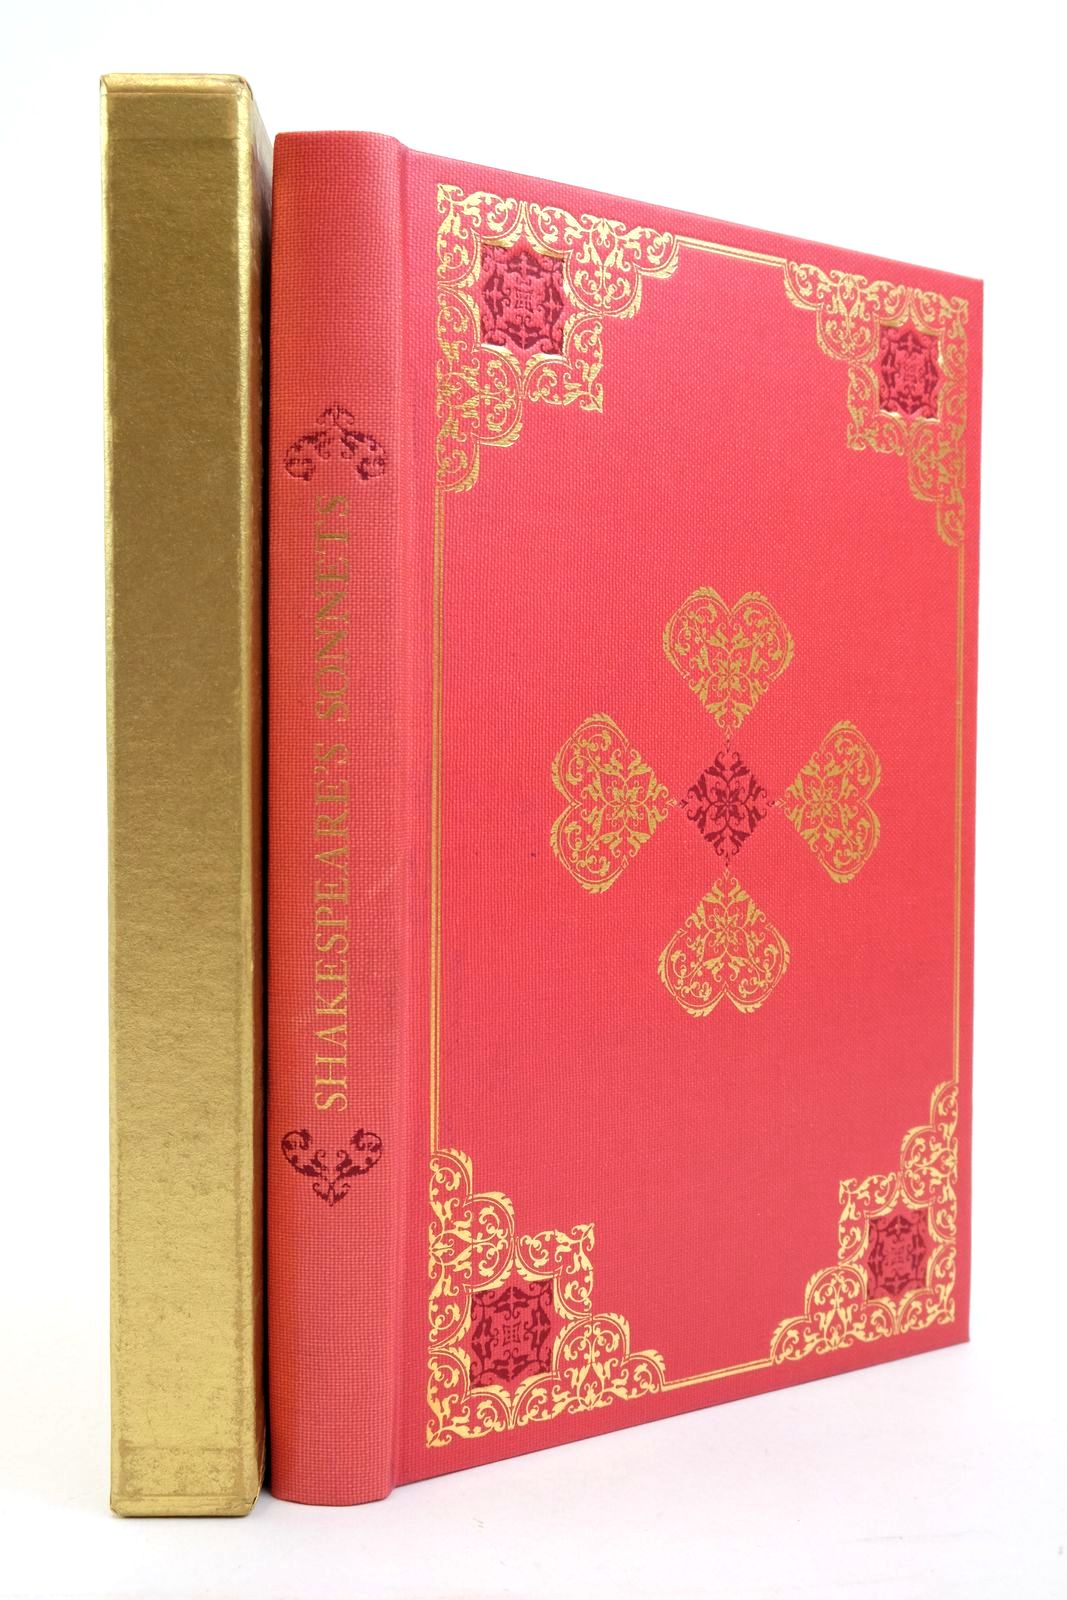 Photo of SHAKESPEARE'S SONNETS- Stock Number: 2138390